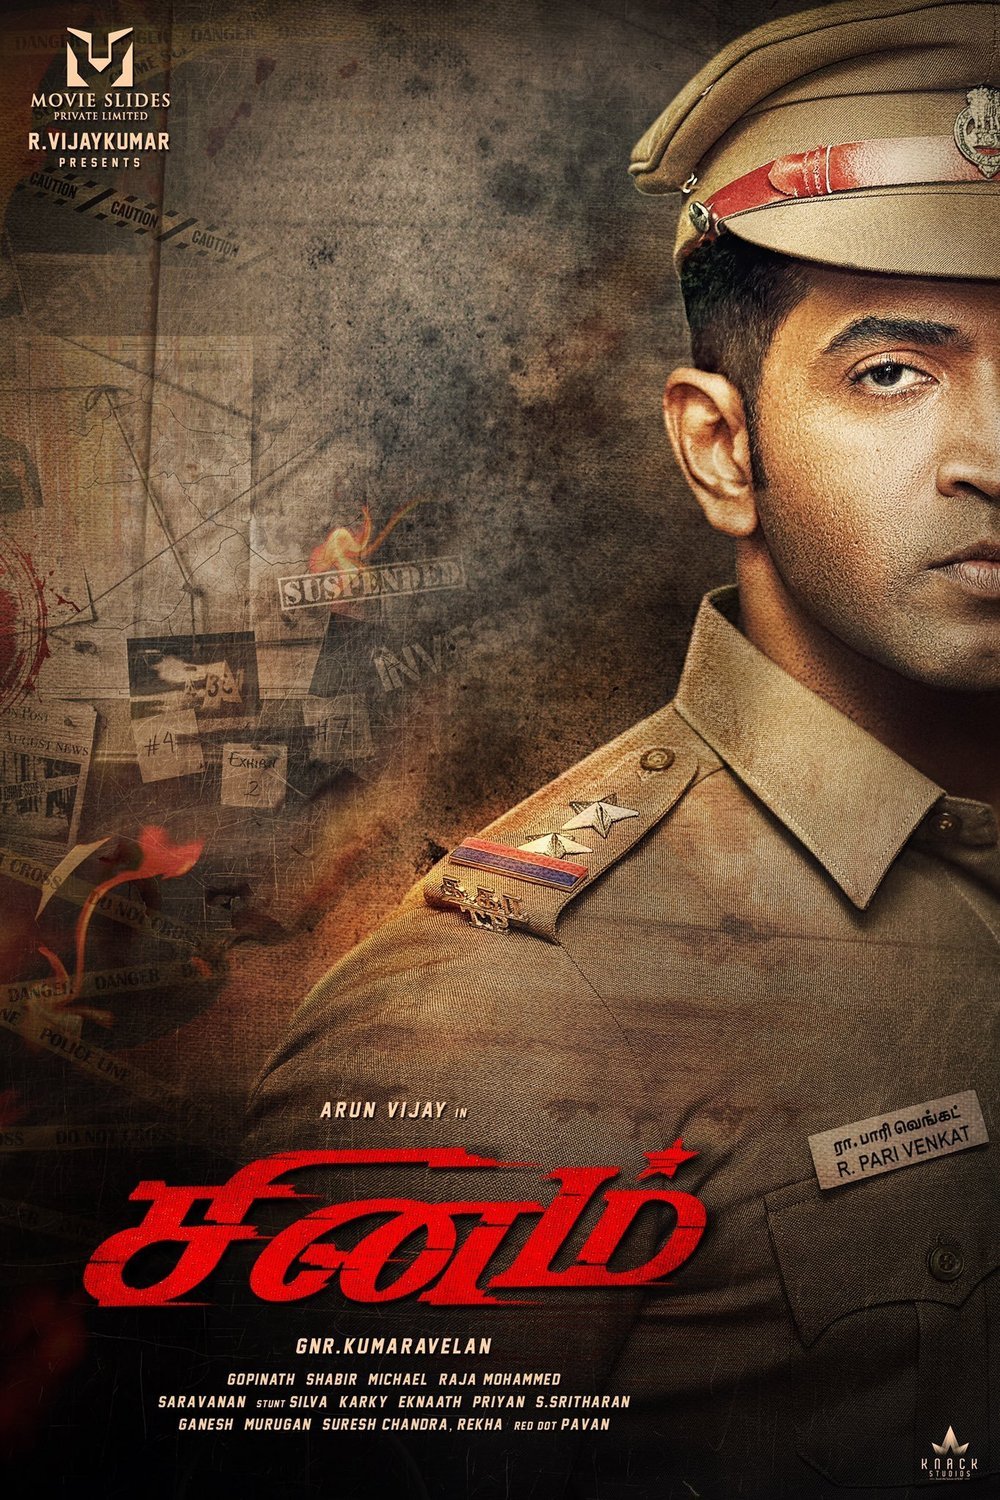 Tamil poster of the movie Sinam